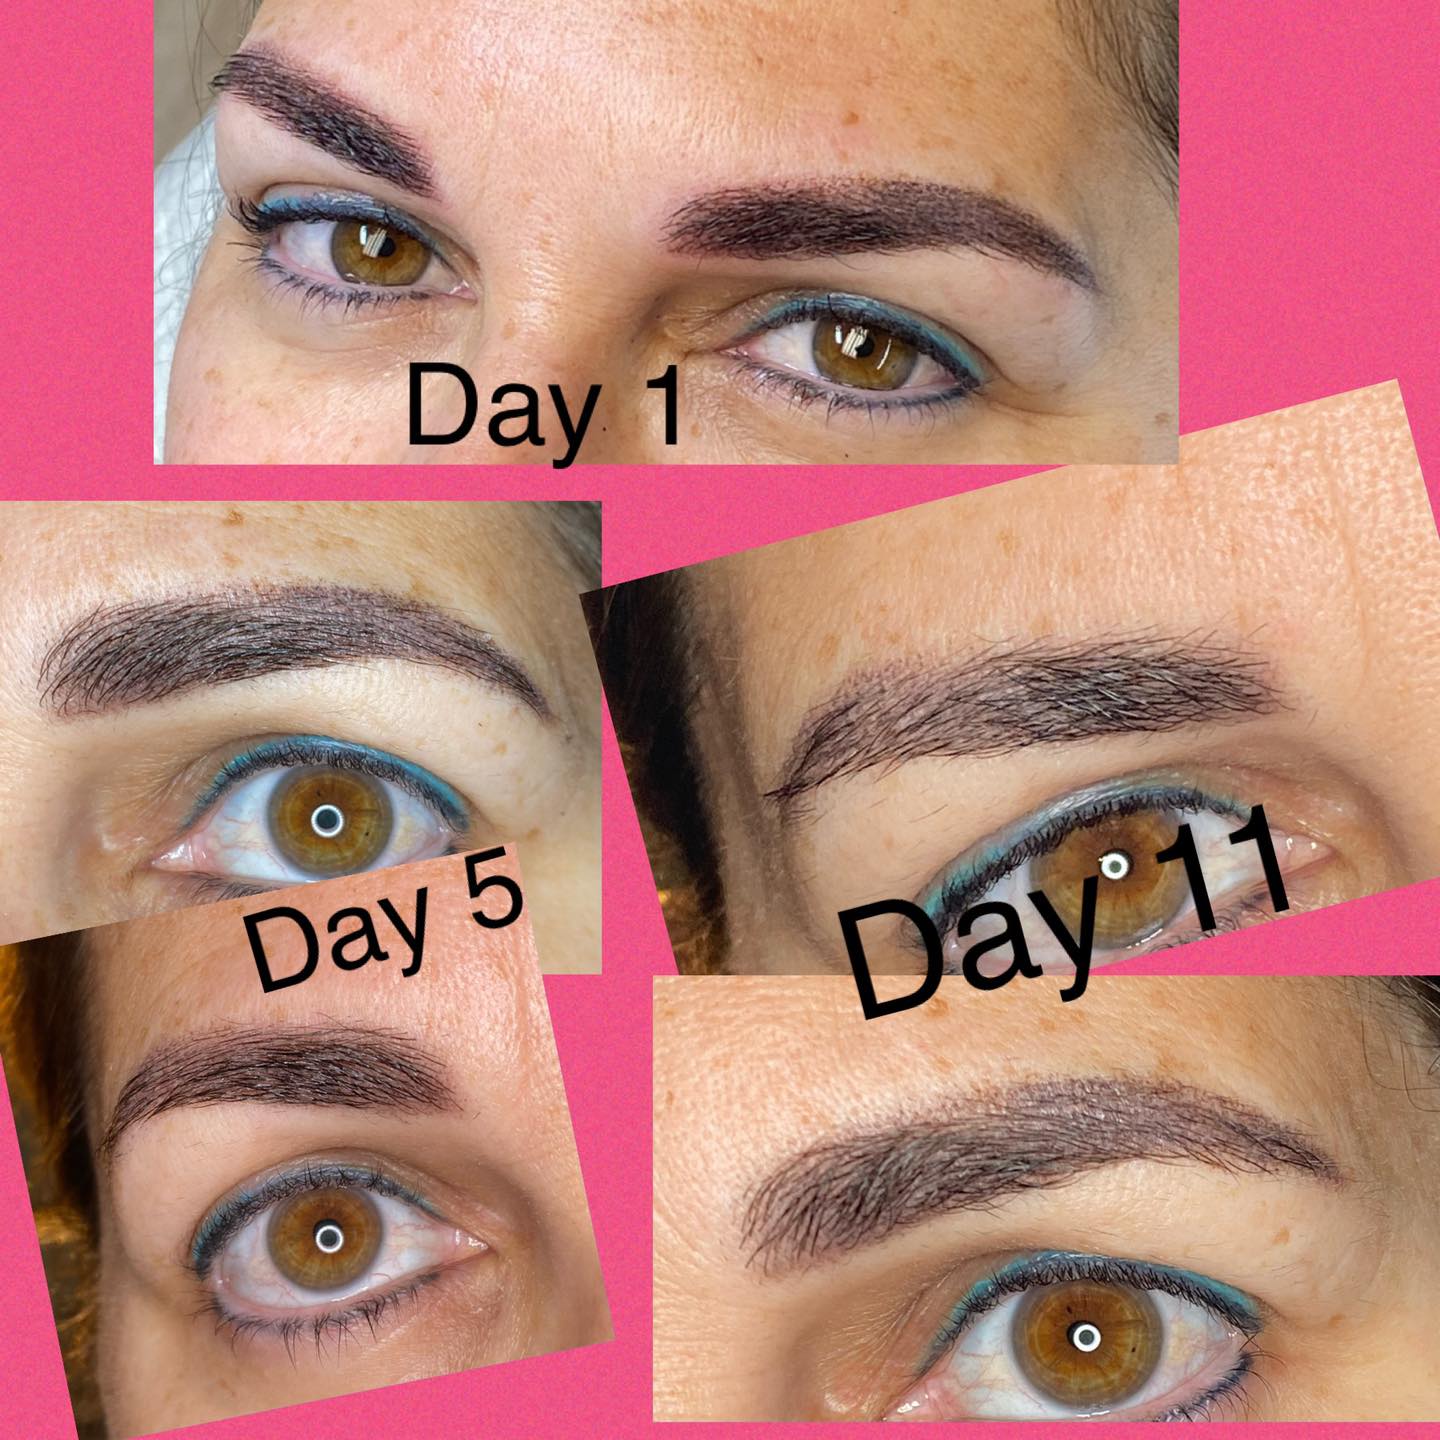 Nusta Cosmetics Permanent Makeup by Connie Marling 110 E Main St, St Clairsville Ohio 43950